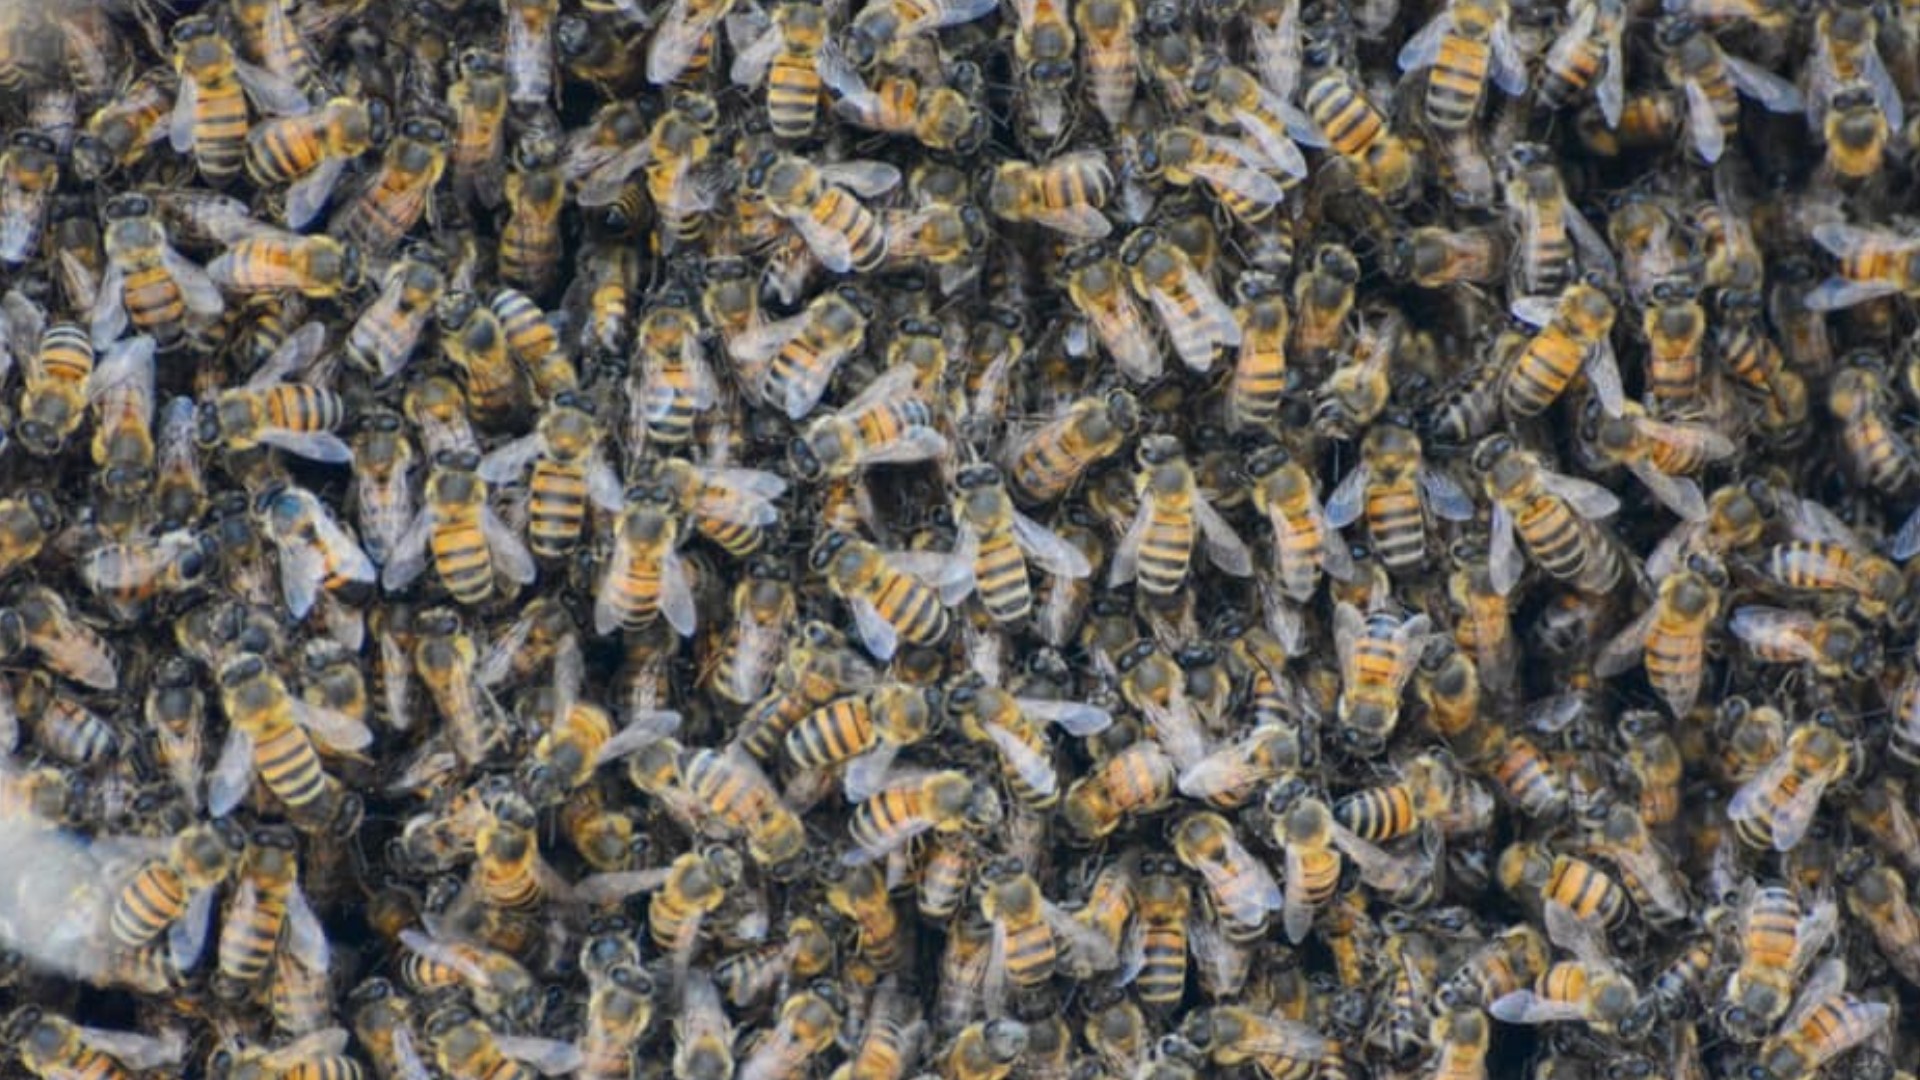 A large bee swarm in Phoenix left three people injured on Wednesday, including one man who had to be rushed to a hospital.